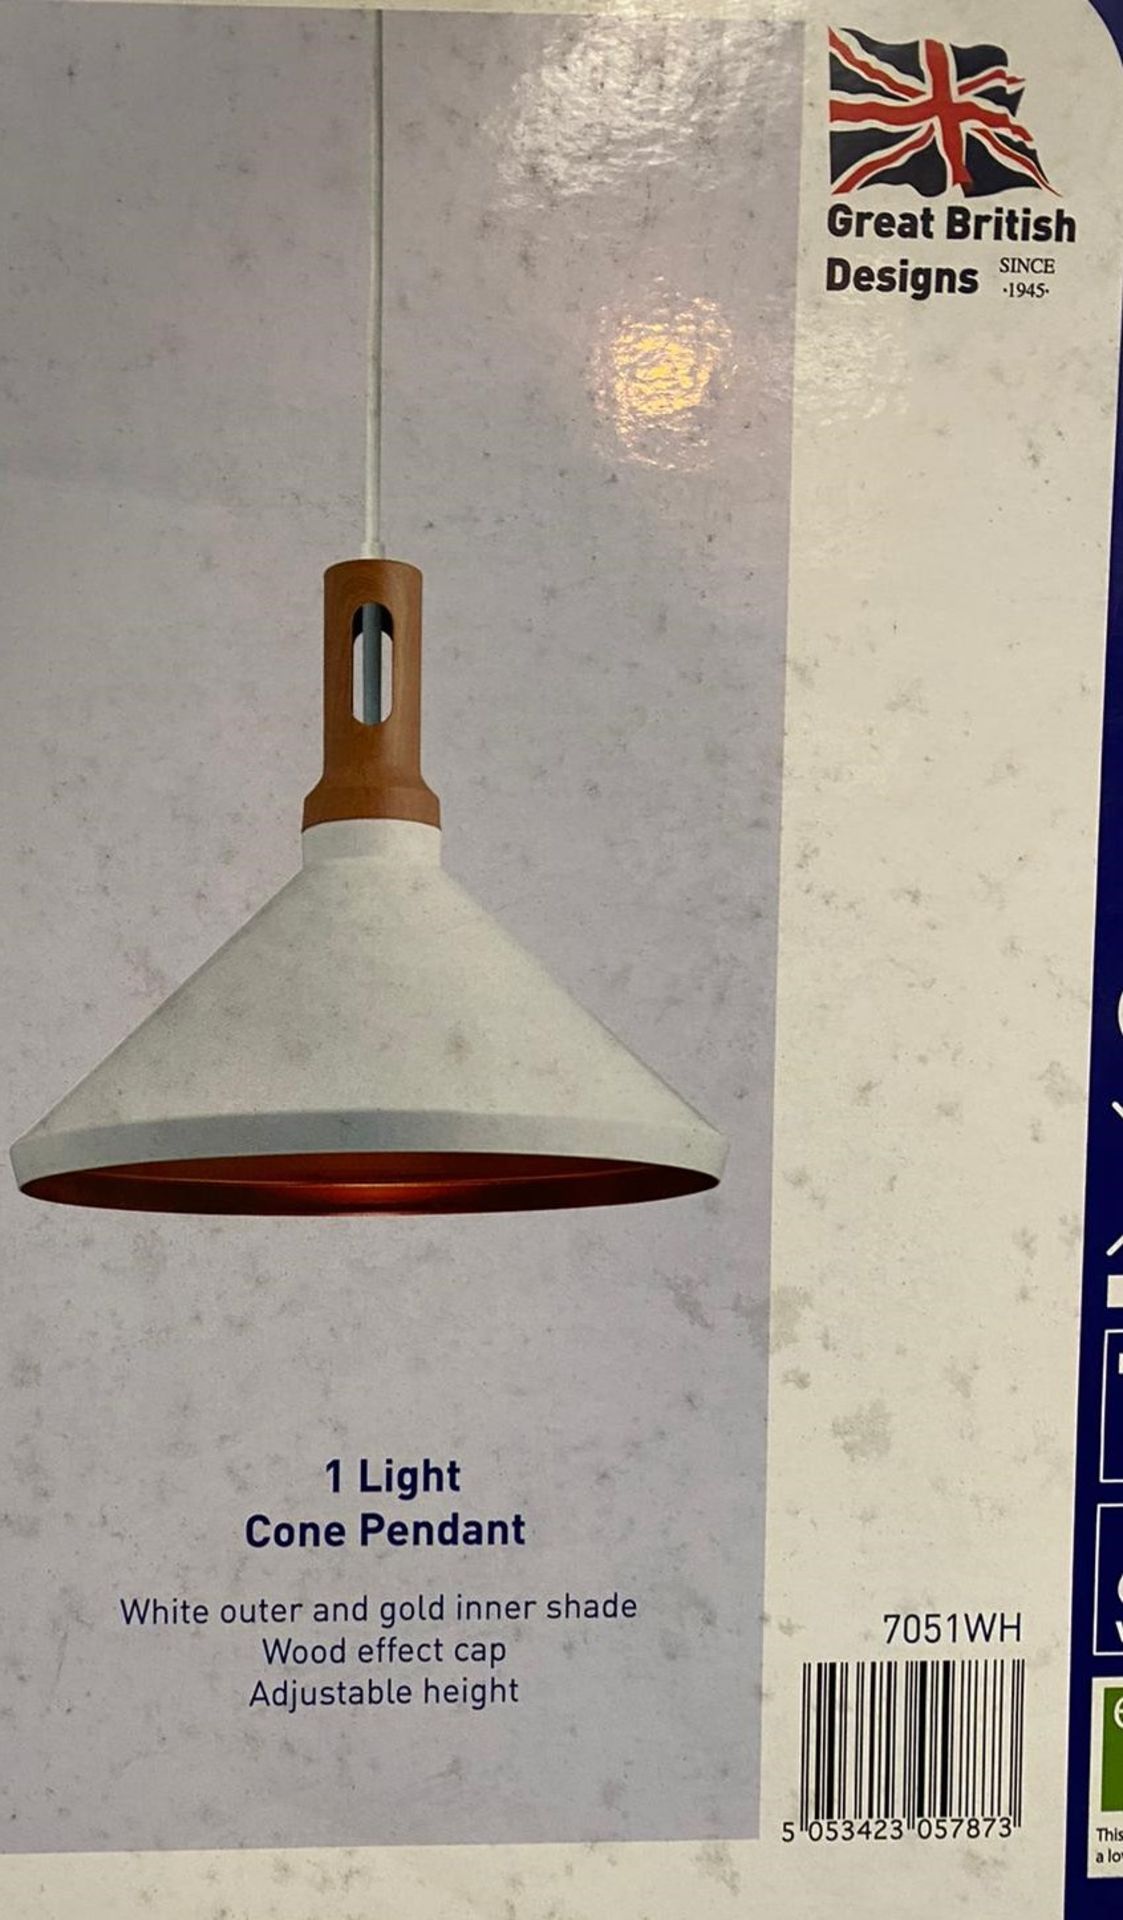 1 x Searchlight 1 Light Cone Pendant in white - Ref: 7051WH - New and Boxed - RRP: £85.00 - Image 2 of 4